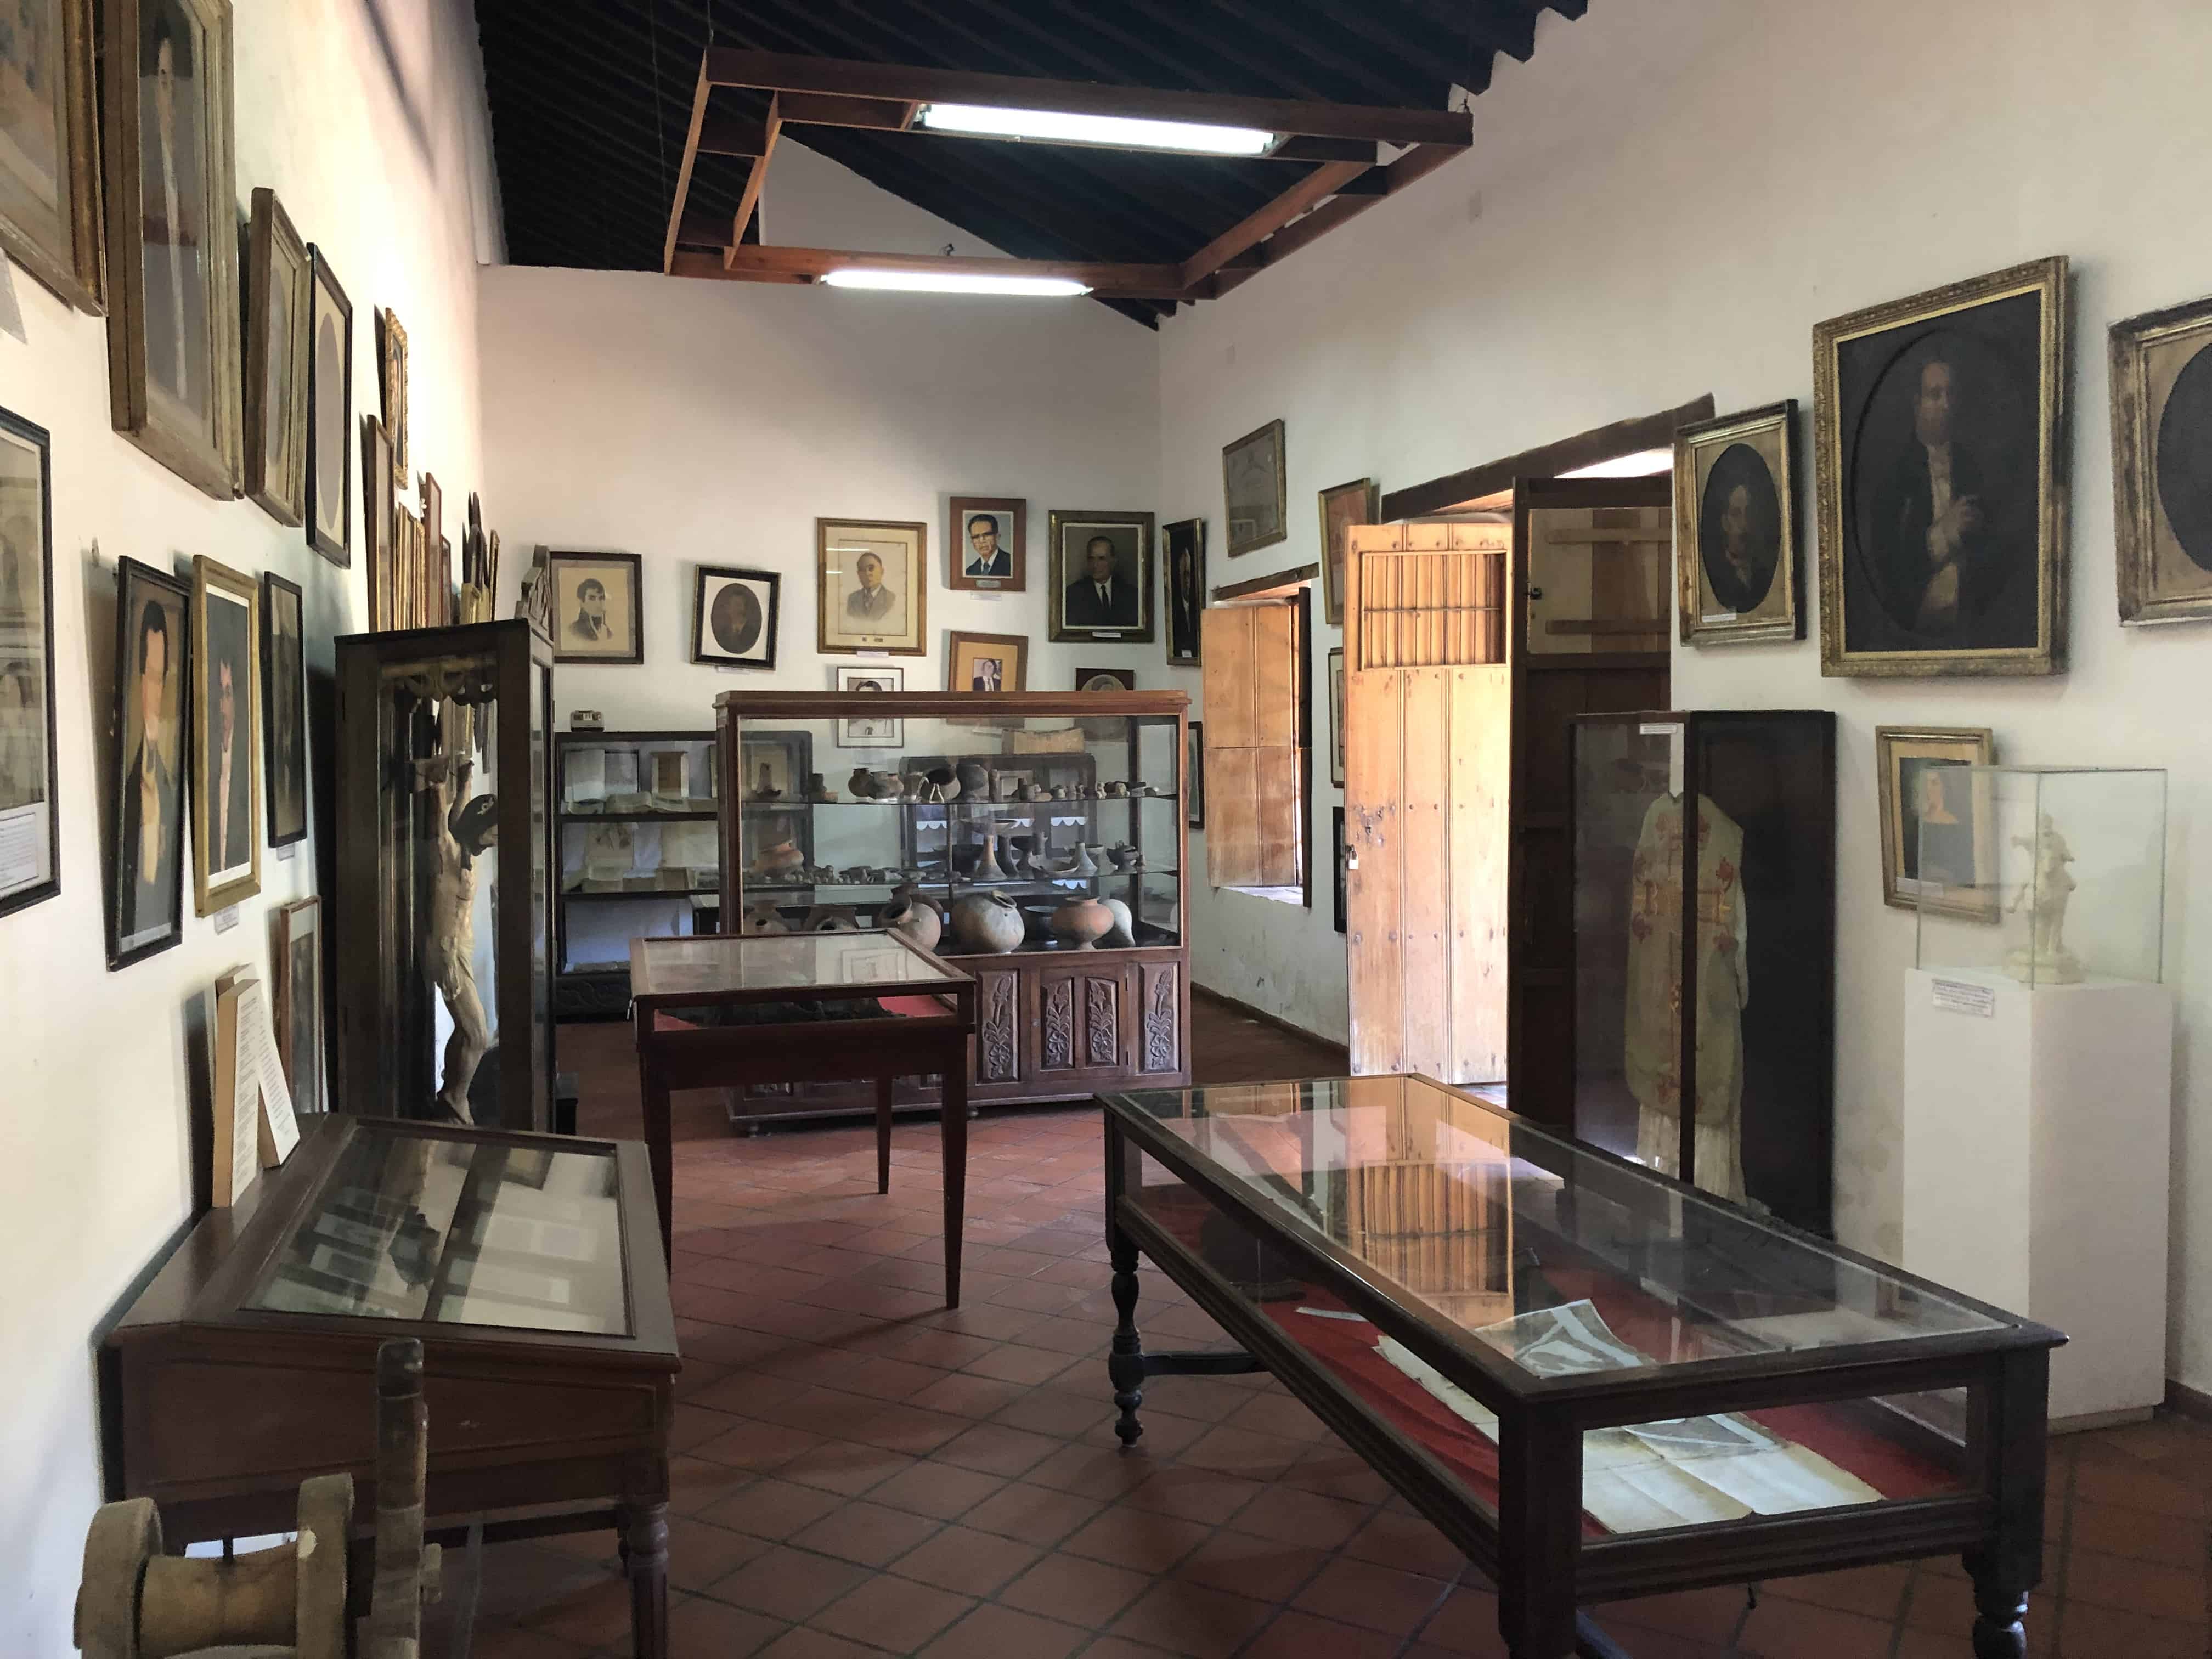 Historical exhibit in the Cultural Center of Mompox, Bolívar, Colombia